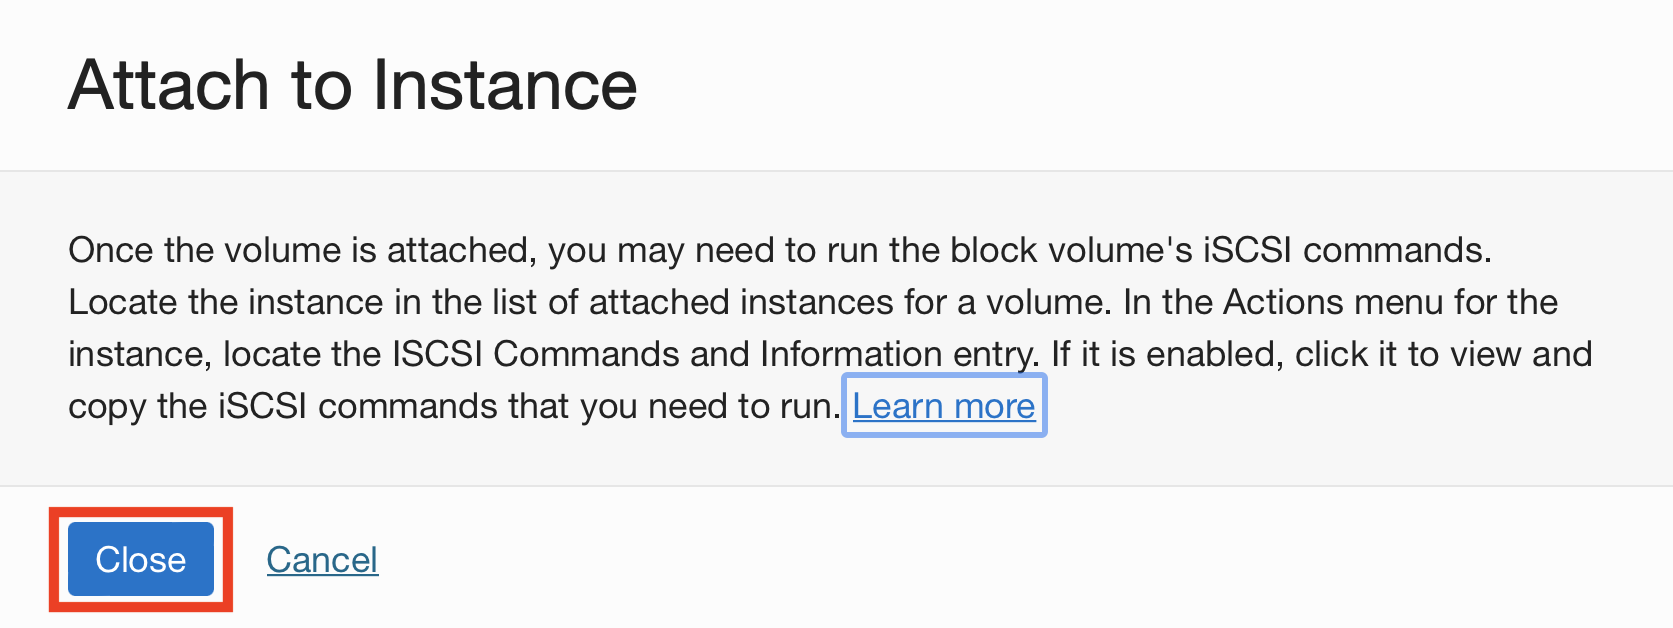 Attach to Instance Dialog